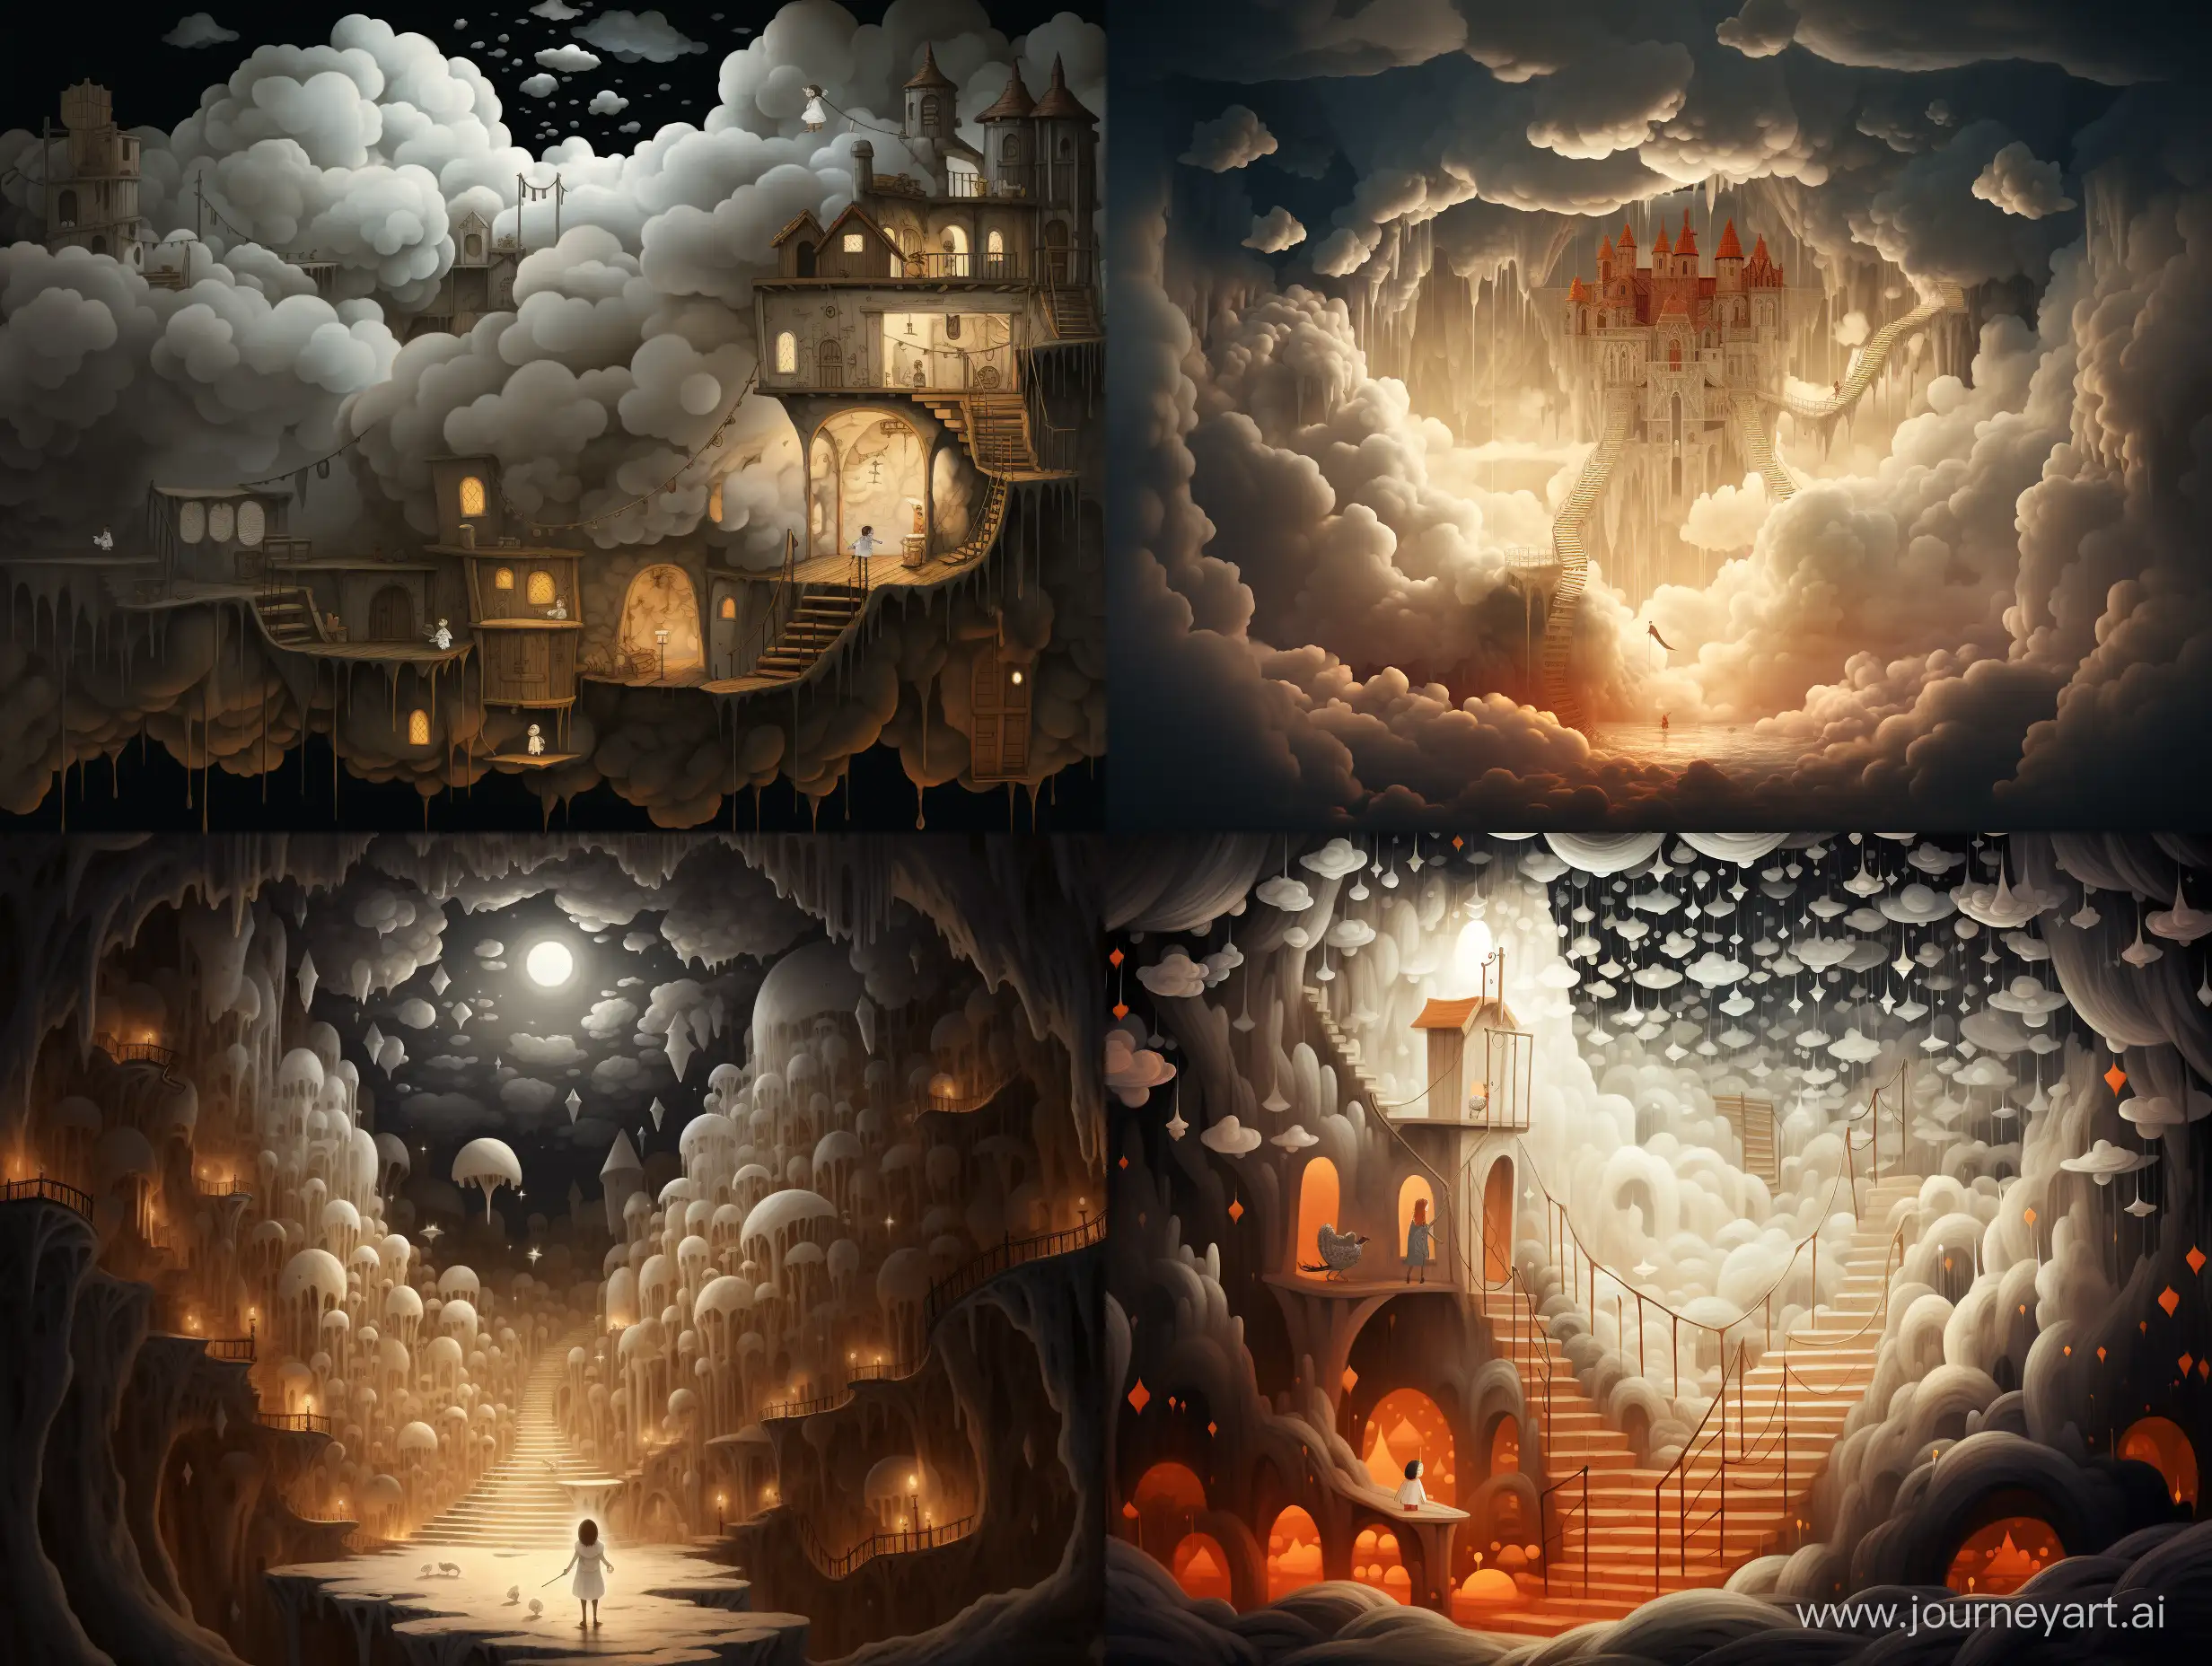 Enchanting-Fairytale-Illustration-Lone-White-Cloud-in-the-Dungeon